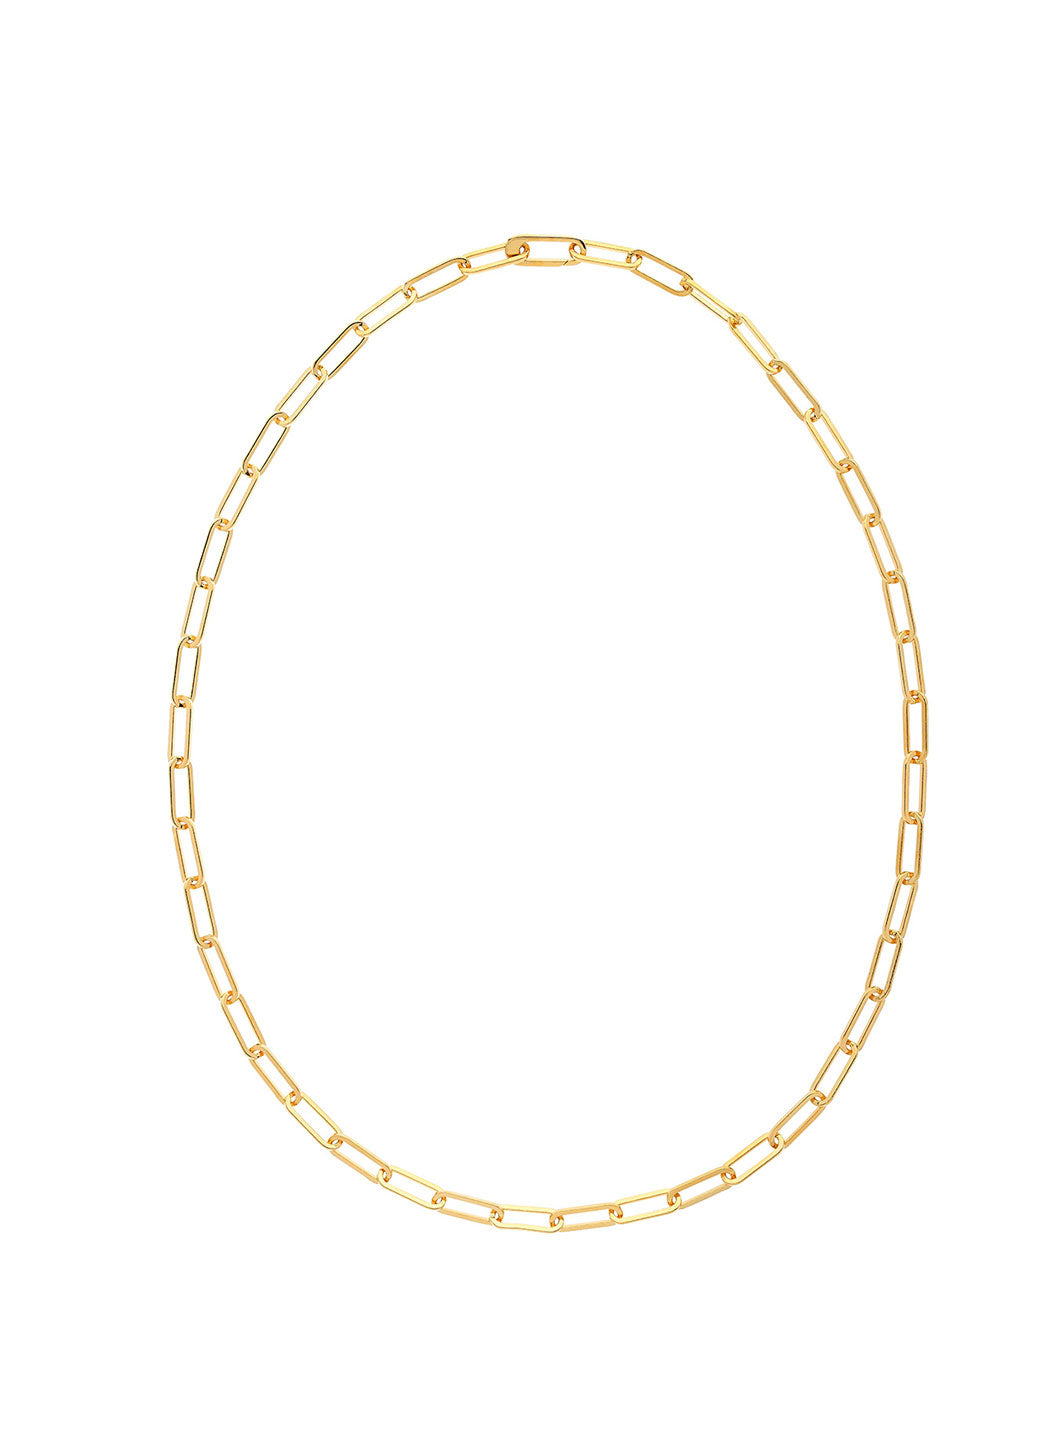 Melissa Odabash Gold Paperclip Chain Necklace